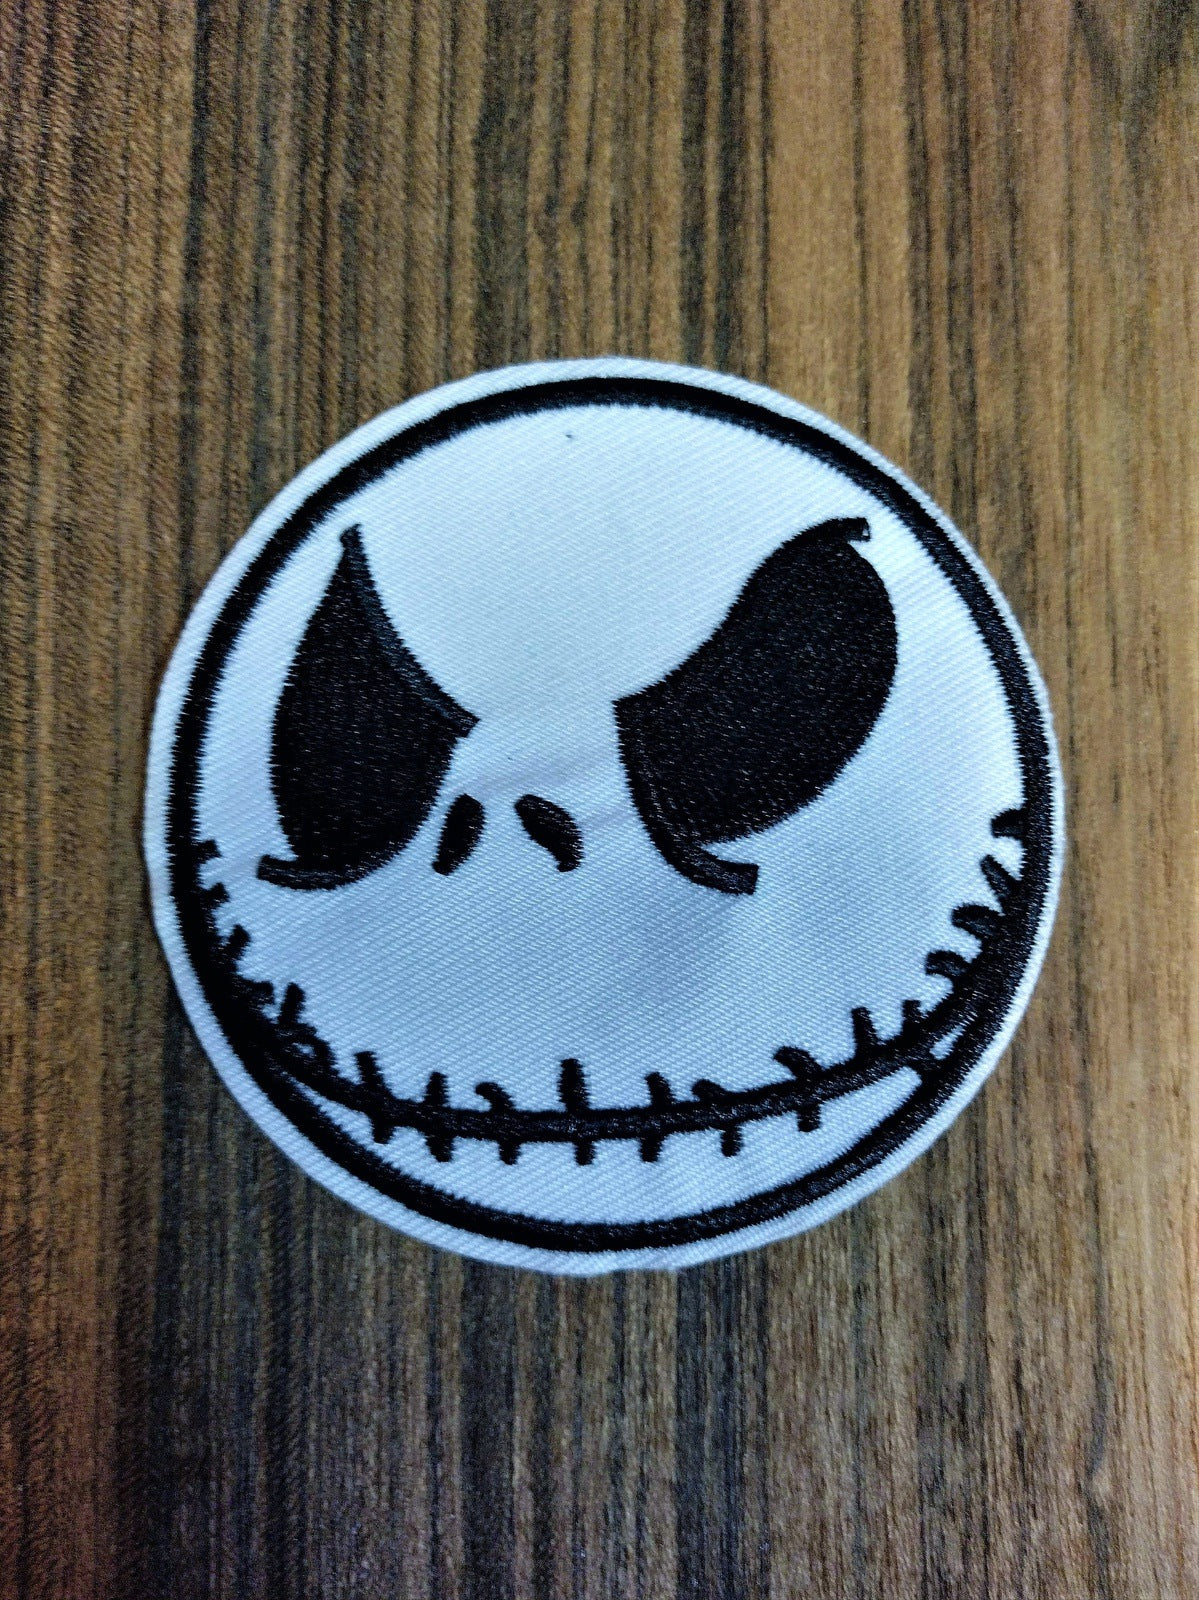 Jack Skellington Patch approx. inches